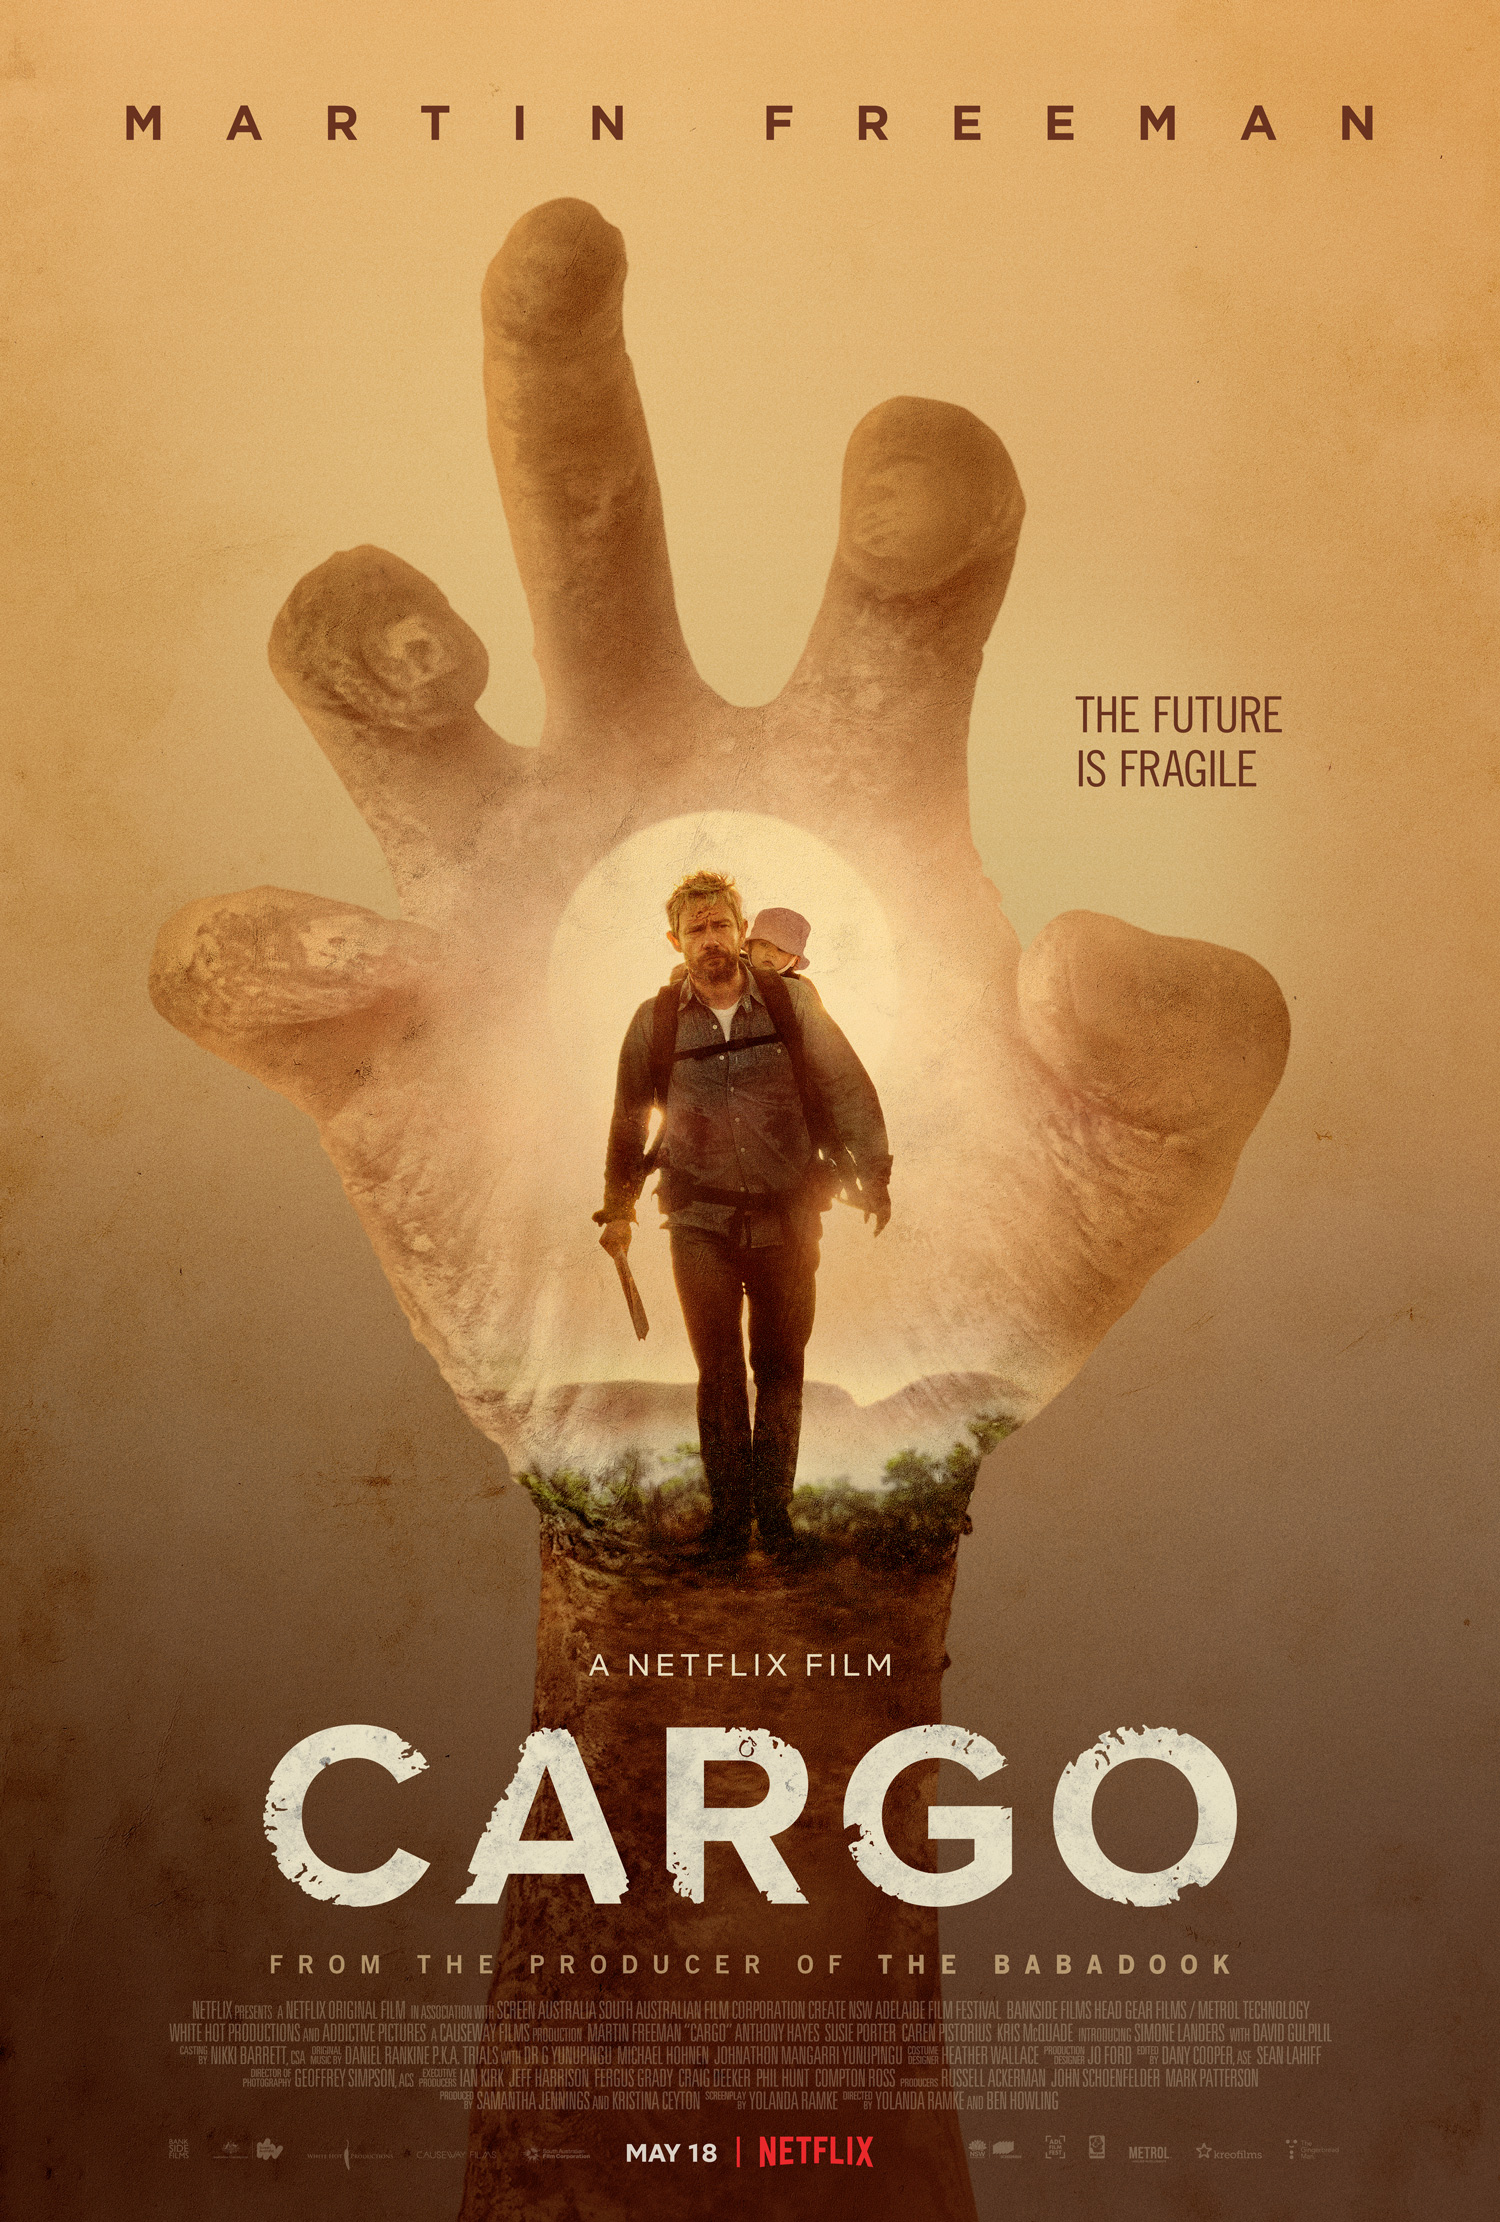 Cargo film review: father-daughter bonding in the zombie apocalypse